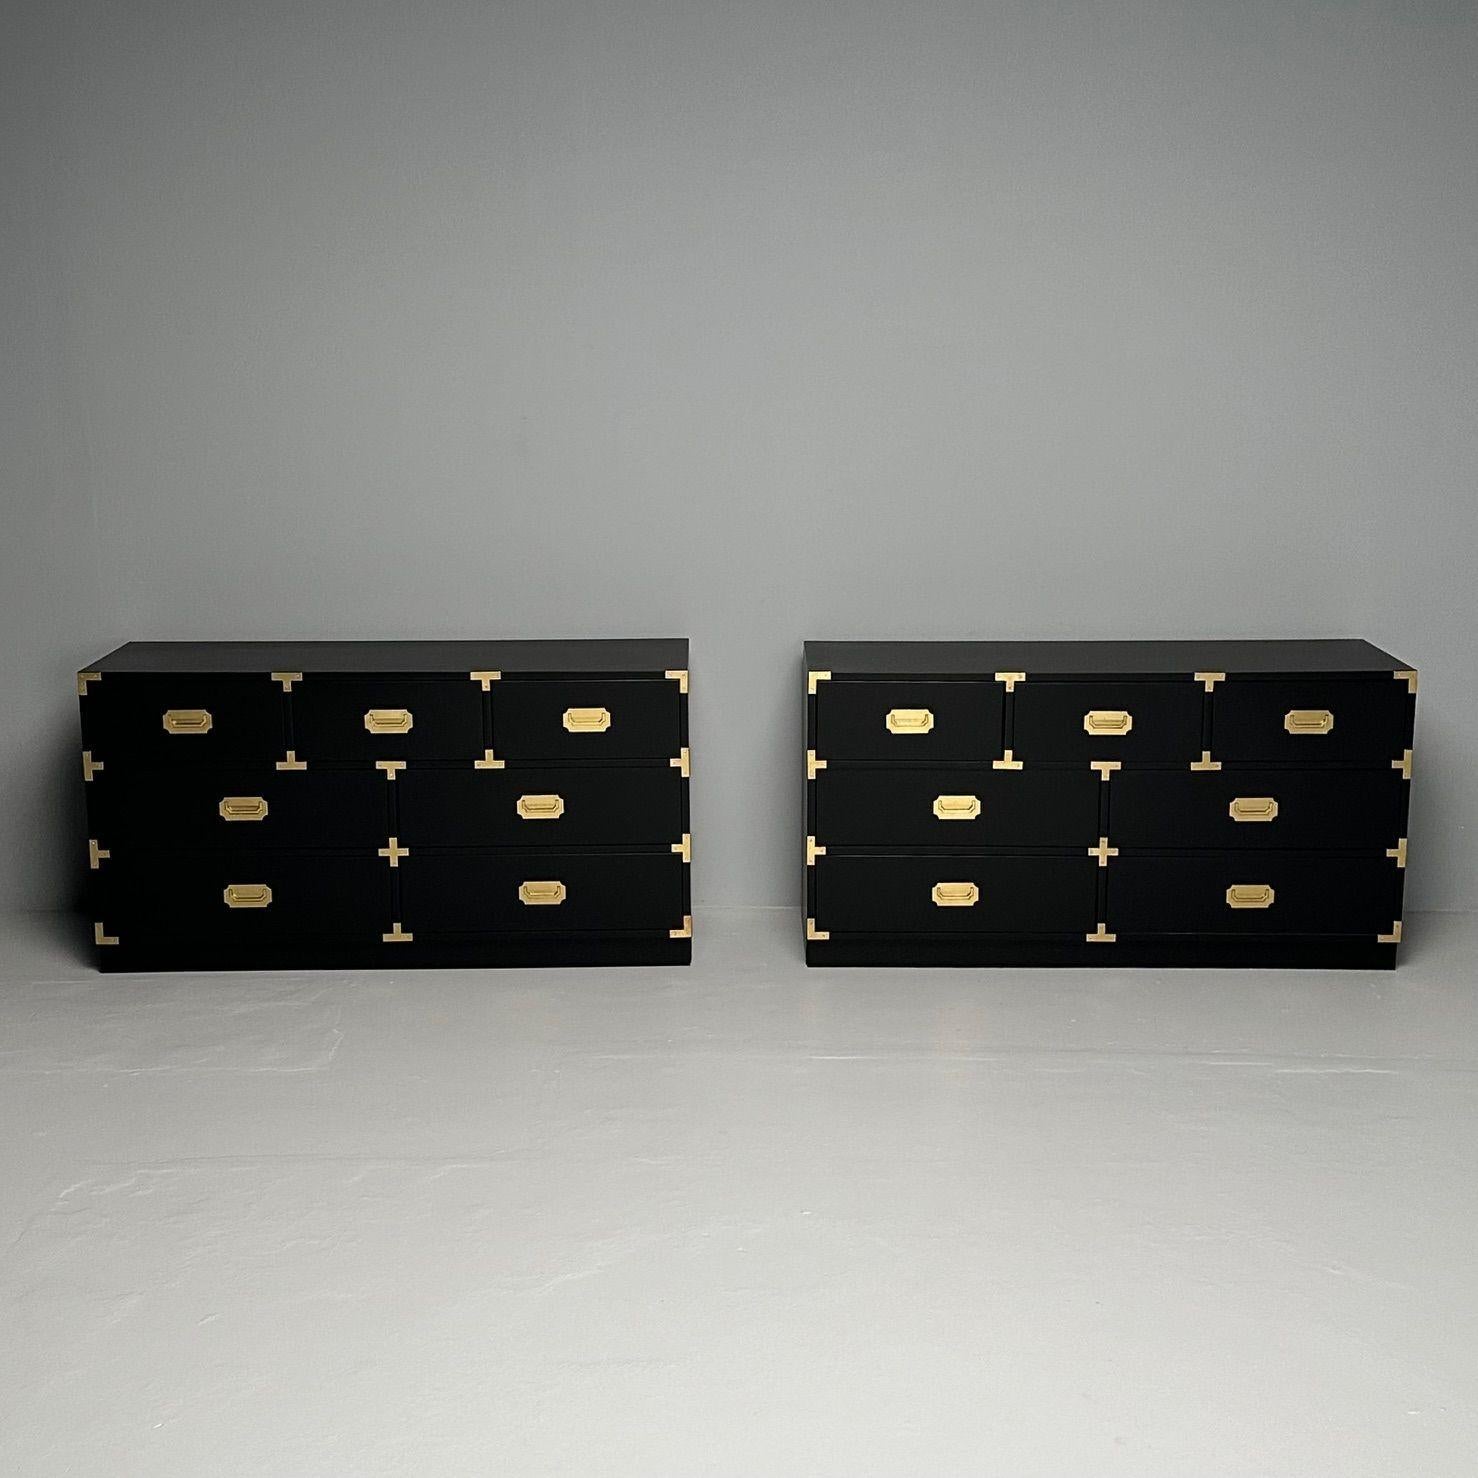 Hollywood Regency, Campaign Chests or Dressers, Black Paint, Brass, USA, 1970s

Pair of mid-century modern campaign dressers designed and produced in the United States, circa 1970s. Each cabinet has been newly refinished with a black satin finish.